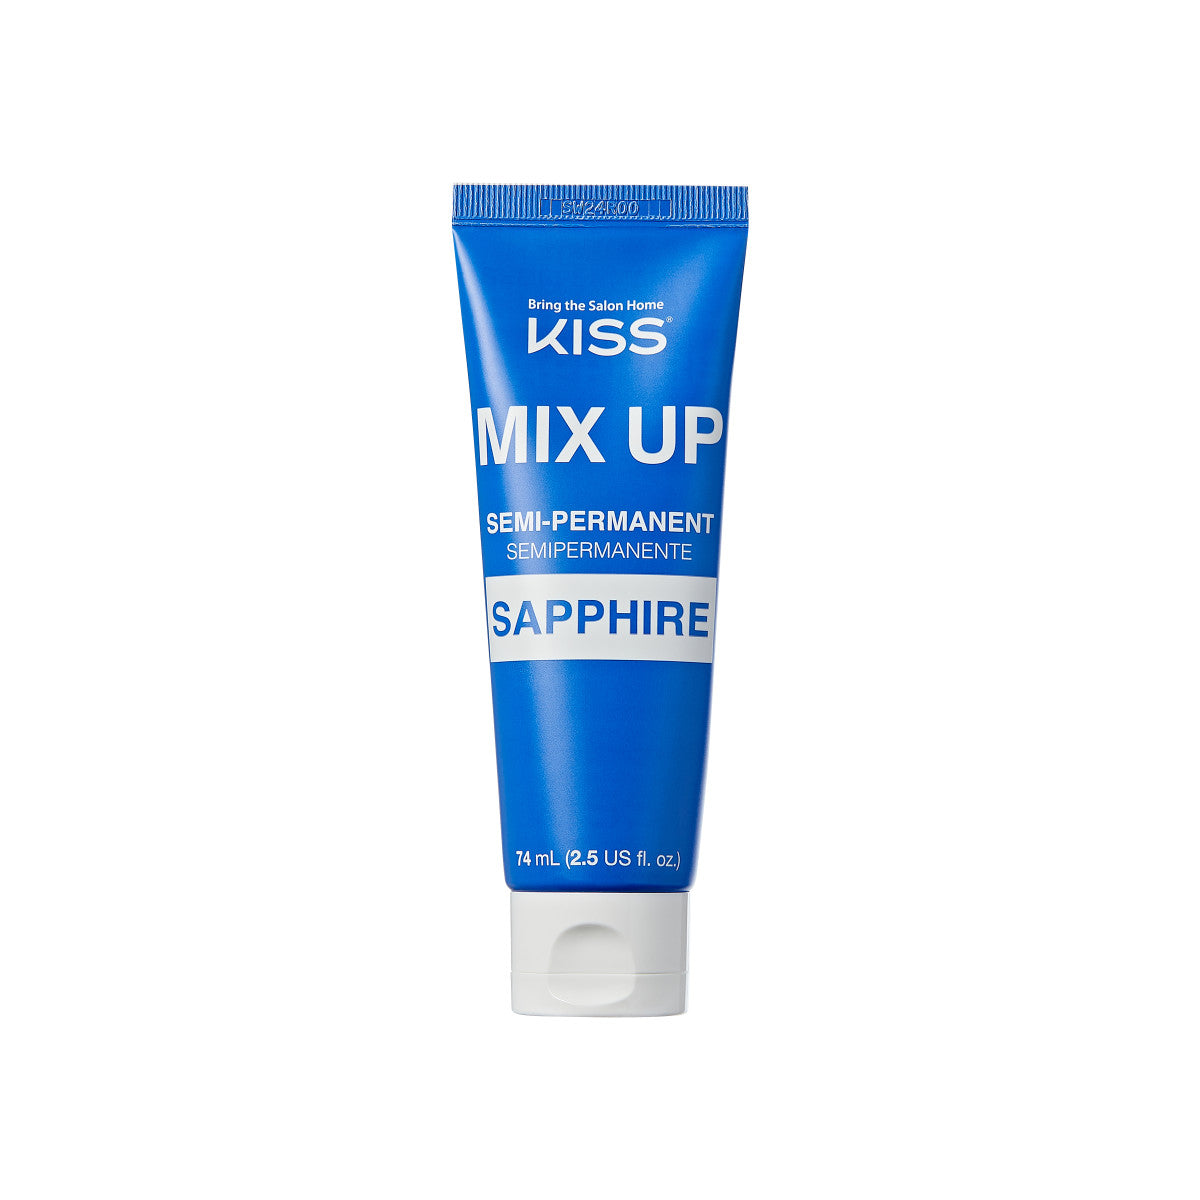 Mix Up Complete Hair Color Kit – Sapphire &amp; Alpine Green